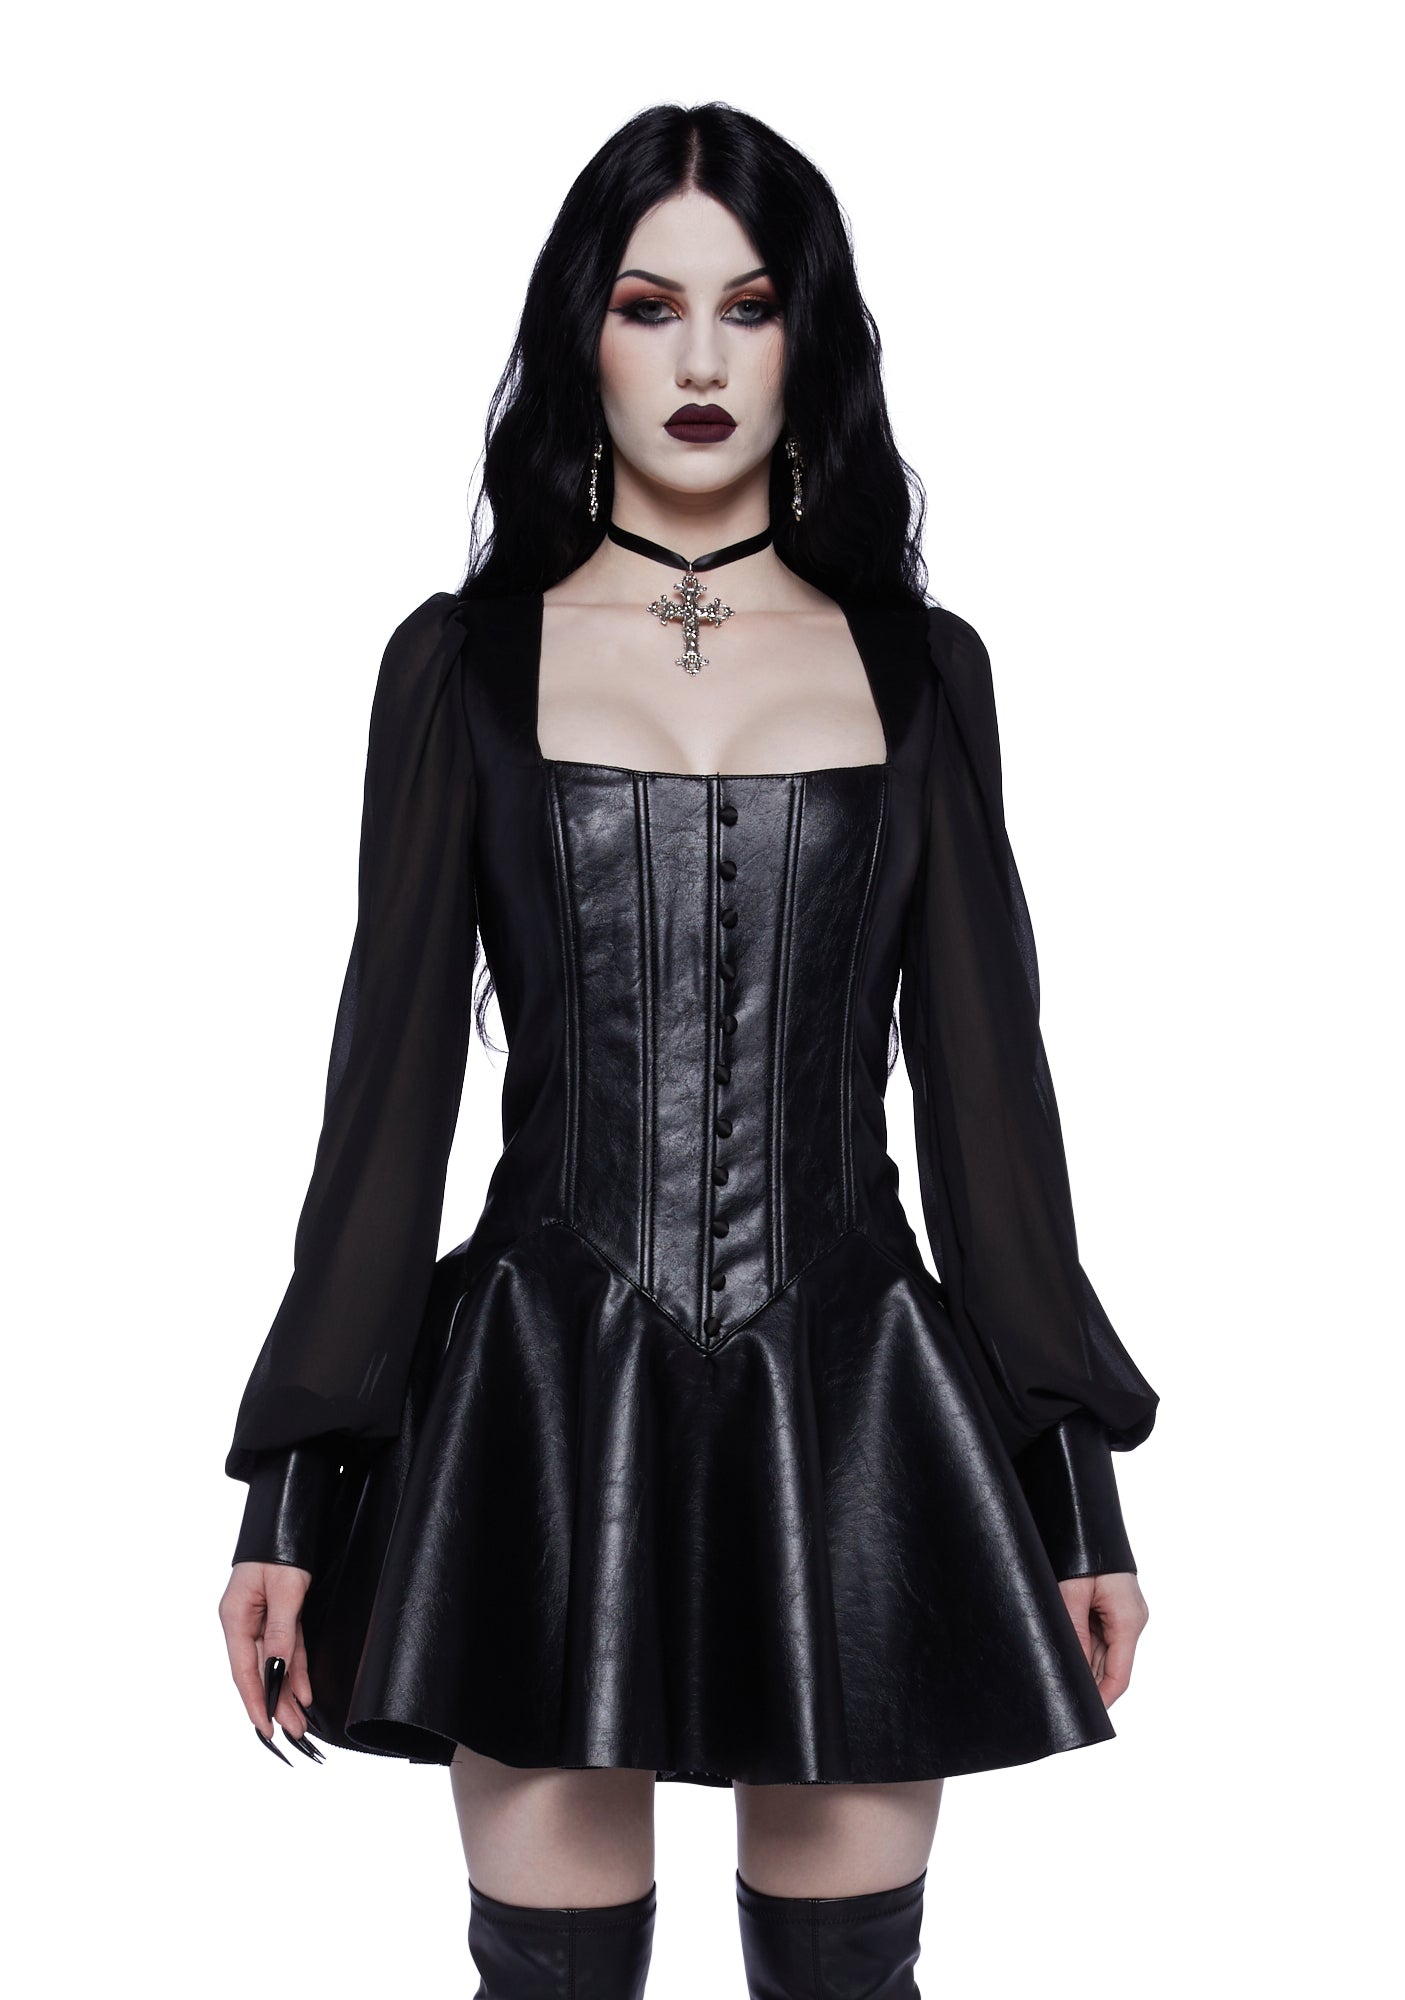 MIDNIGHT HOUR GOTHIC CLOTHING HAUL